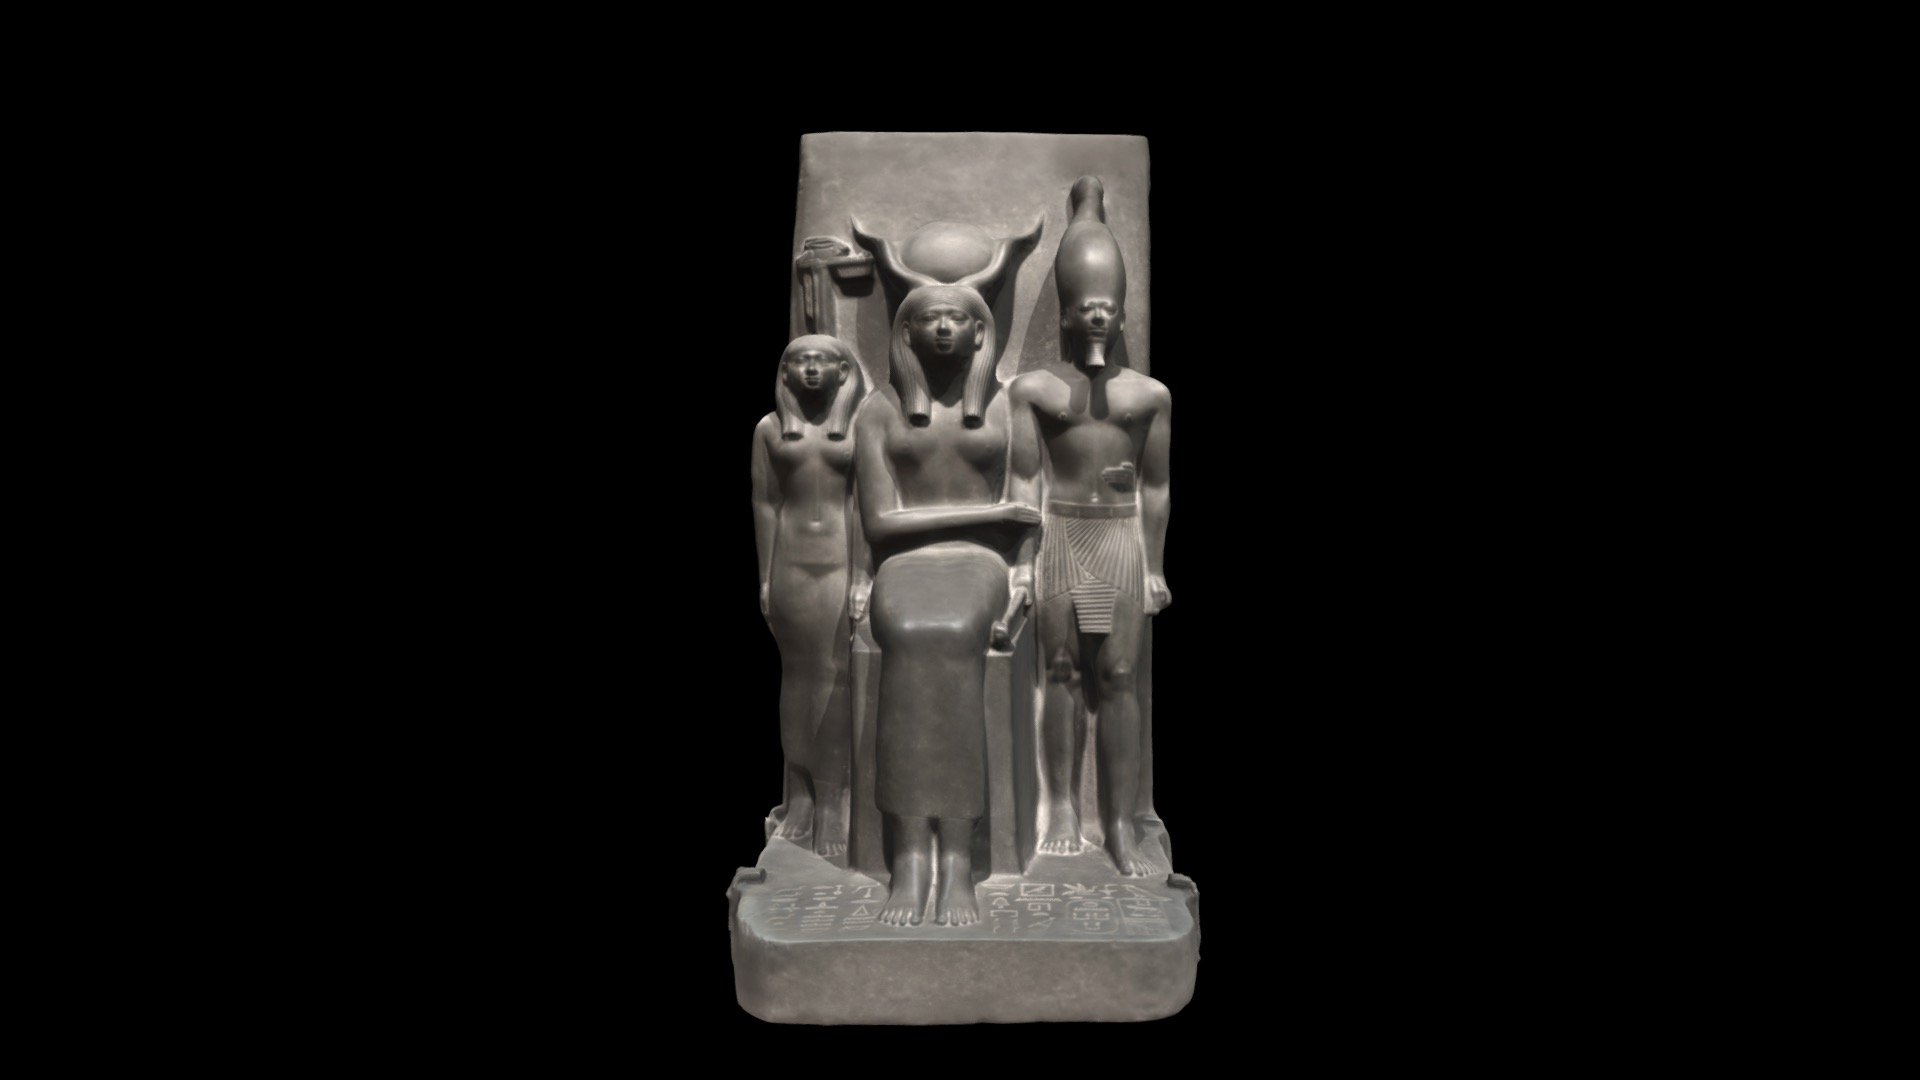 King Menkaure, the goddess Hathor, and the deified Hare nome

Egyptian Old Kingdom, Dynasty 4, reign of Menkaura 2490–2472 B.C. 

Findspot: Egypt, Giza, Menkaura Valley Temple

Greywacke

Width x height x depth x weight: 43.5 x 84.5 x 49 cm, 187.8 kg (17 1/8 x 33 1/4 x 19 5/16 in., 414.02 lb.) 
Mount (Steel pallet sits on wooden reinforced pedestal/4-steel clips): 10.2 x 62.5 x 64.8 cm (4 x 24 5/8 x 25 1/2 in.) 
Case (wooden pedestal): 100.3 x 68.6 x 71.1 cm (39 1/2 x 27 x 28 in.) 
Block (Plex-bonnet): 105.4 x 64.5 x 67 cm (41 1/2 x 25 3/8 x 26 3/8 in.)

Harvard University—Boston Museum of Fine Arts Expedition

Museum of Fine Arts, Boston 09.200

https://collections.mfa.org/objects/138424/king-menkaura-the-goddess-hathor-and-the-deified-hare-nome?ctx=e9a7949a-90a4-4ef2-a17f-1efc9903c7ca&amp;idx=0

Photography by Zhejiang University; photogrammetry by David Anderson.

This model should be used for non-commercial, educational purposes only 3d model